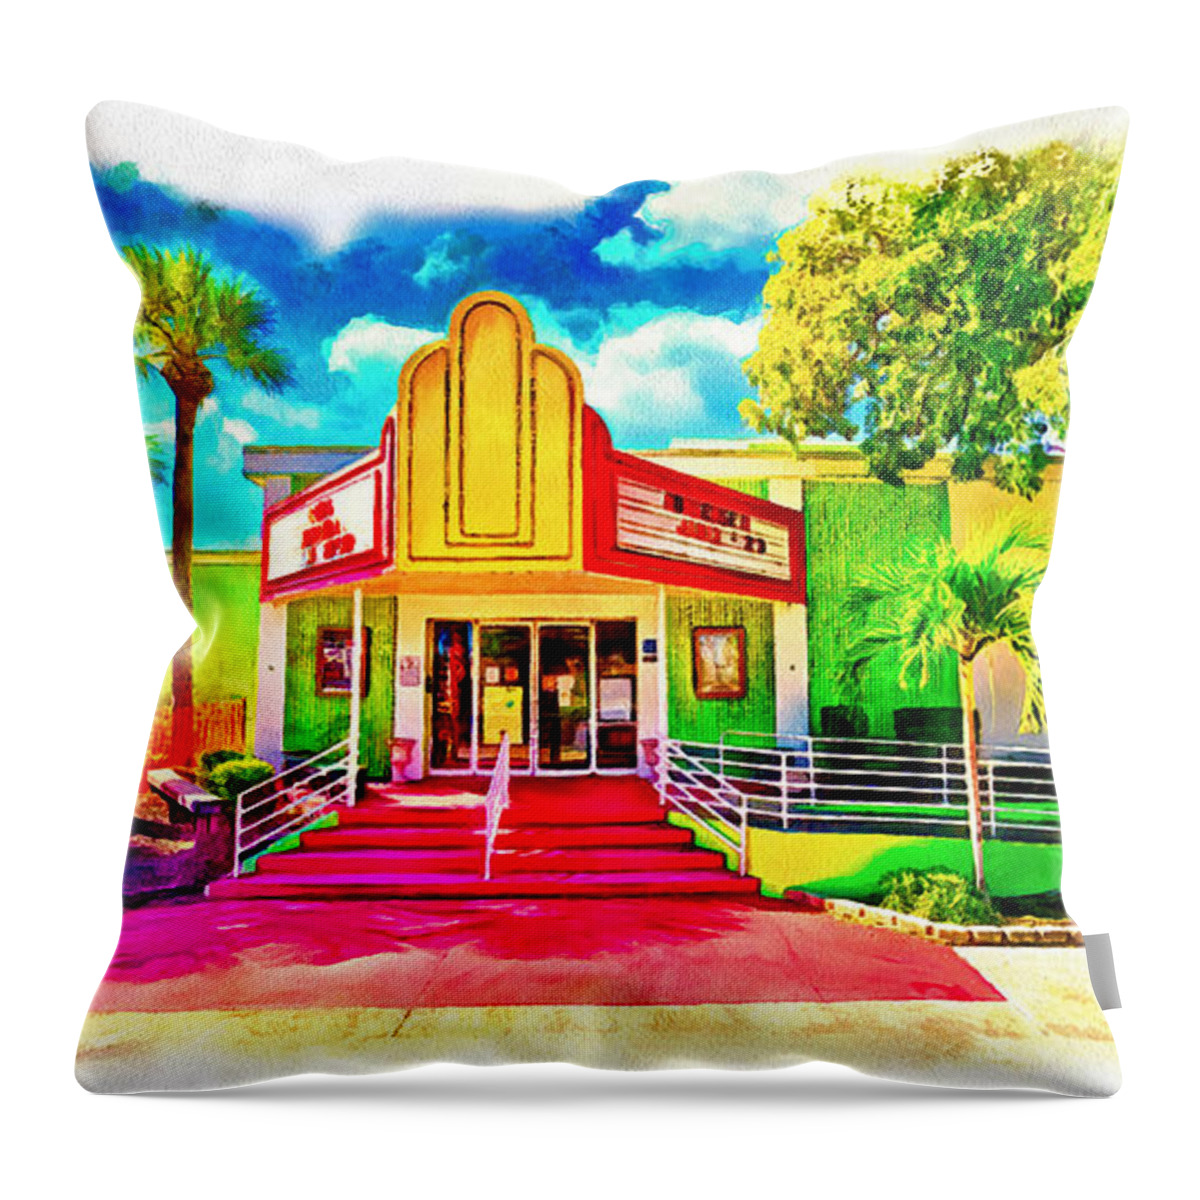 Theater Throw Pillow featuring the digital art Cultural Park Theater in Cape Coral - watercolor painting by Nicko Prints